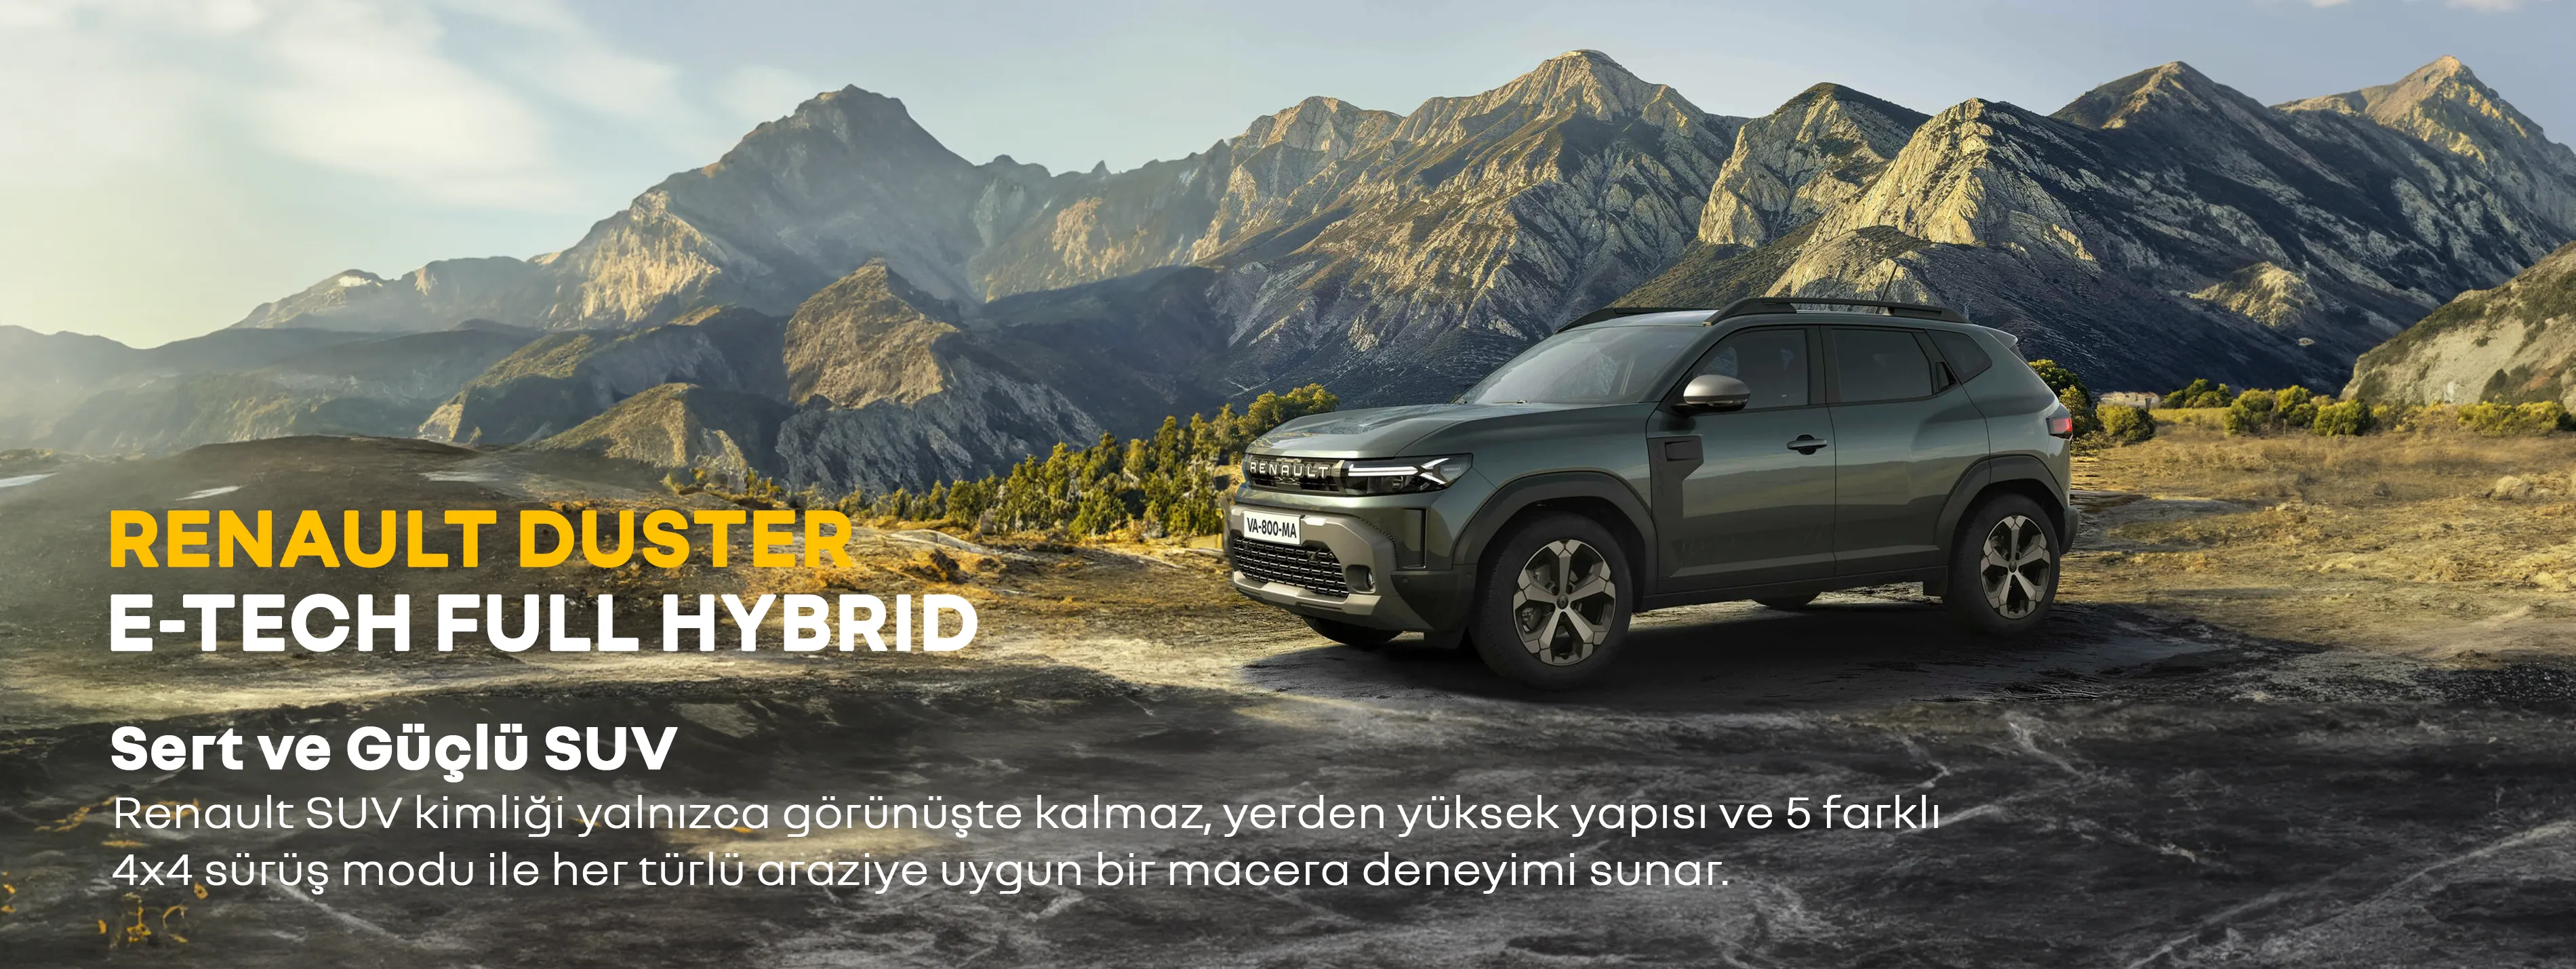 renault-duster.png